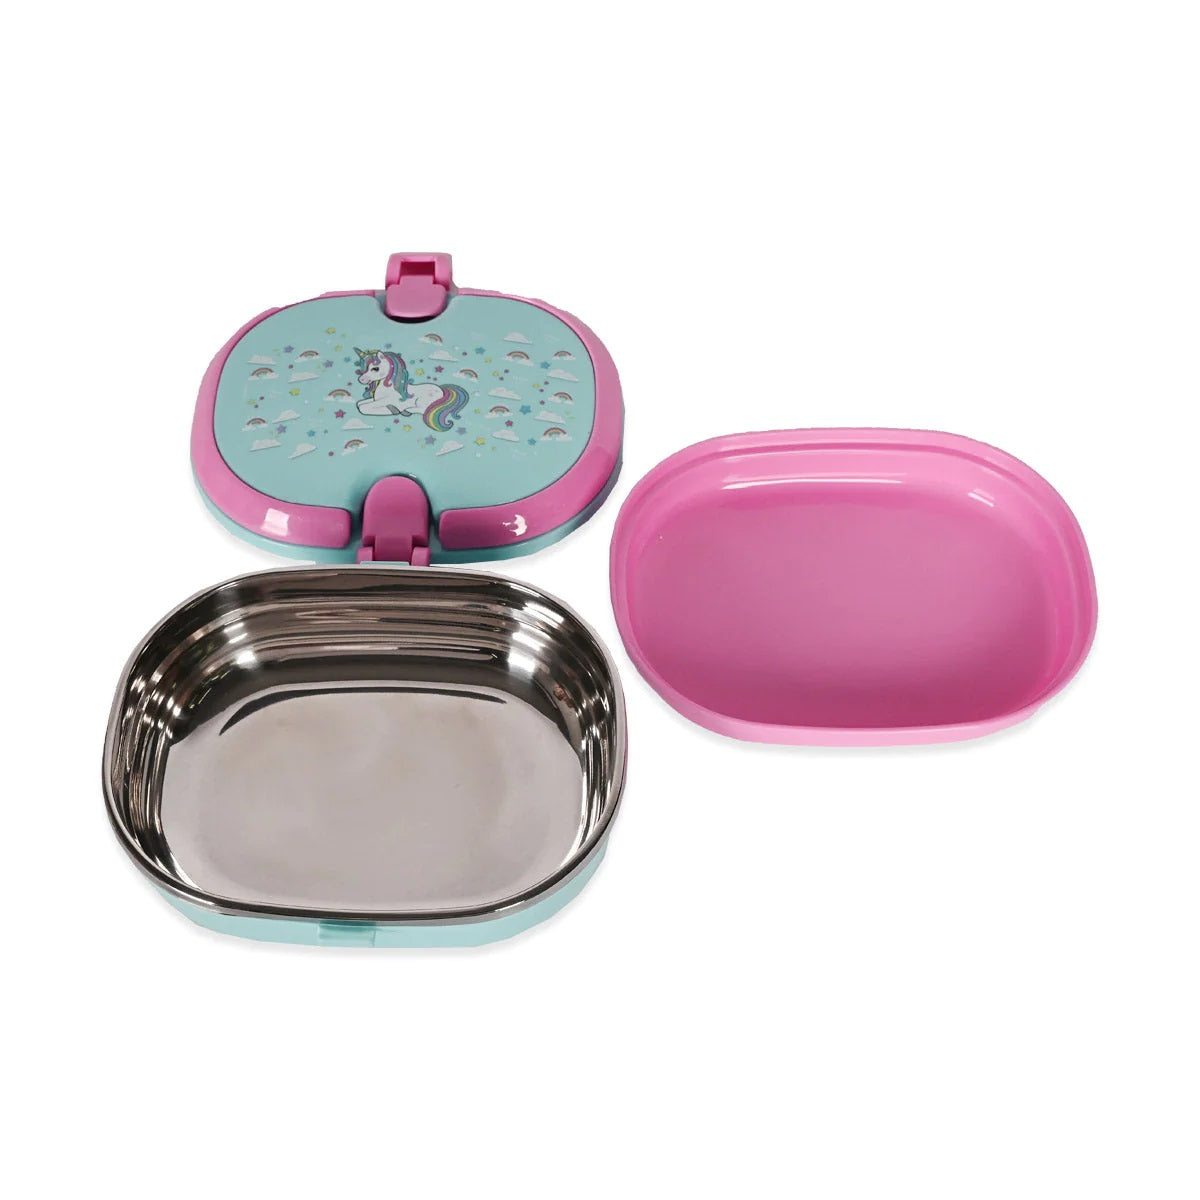 Unicorn Stainless Steel Lunch Box With Clip Closure PLS-0632